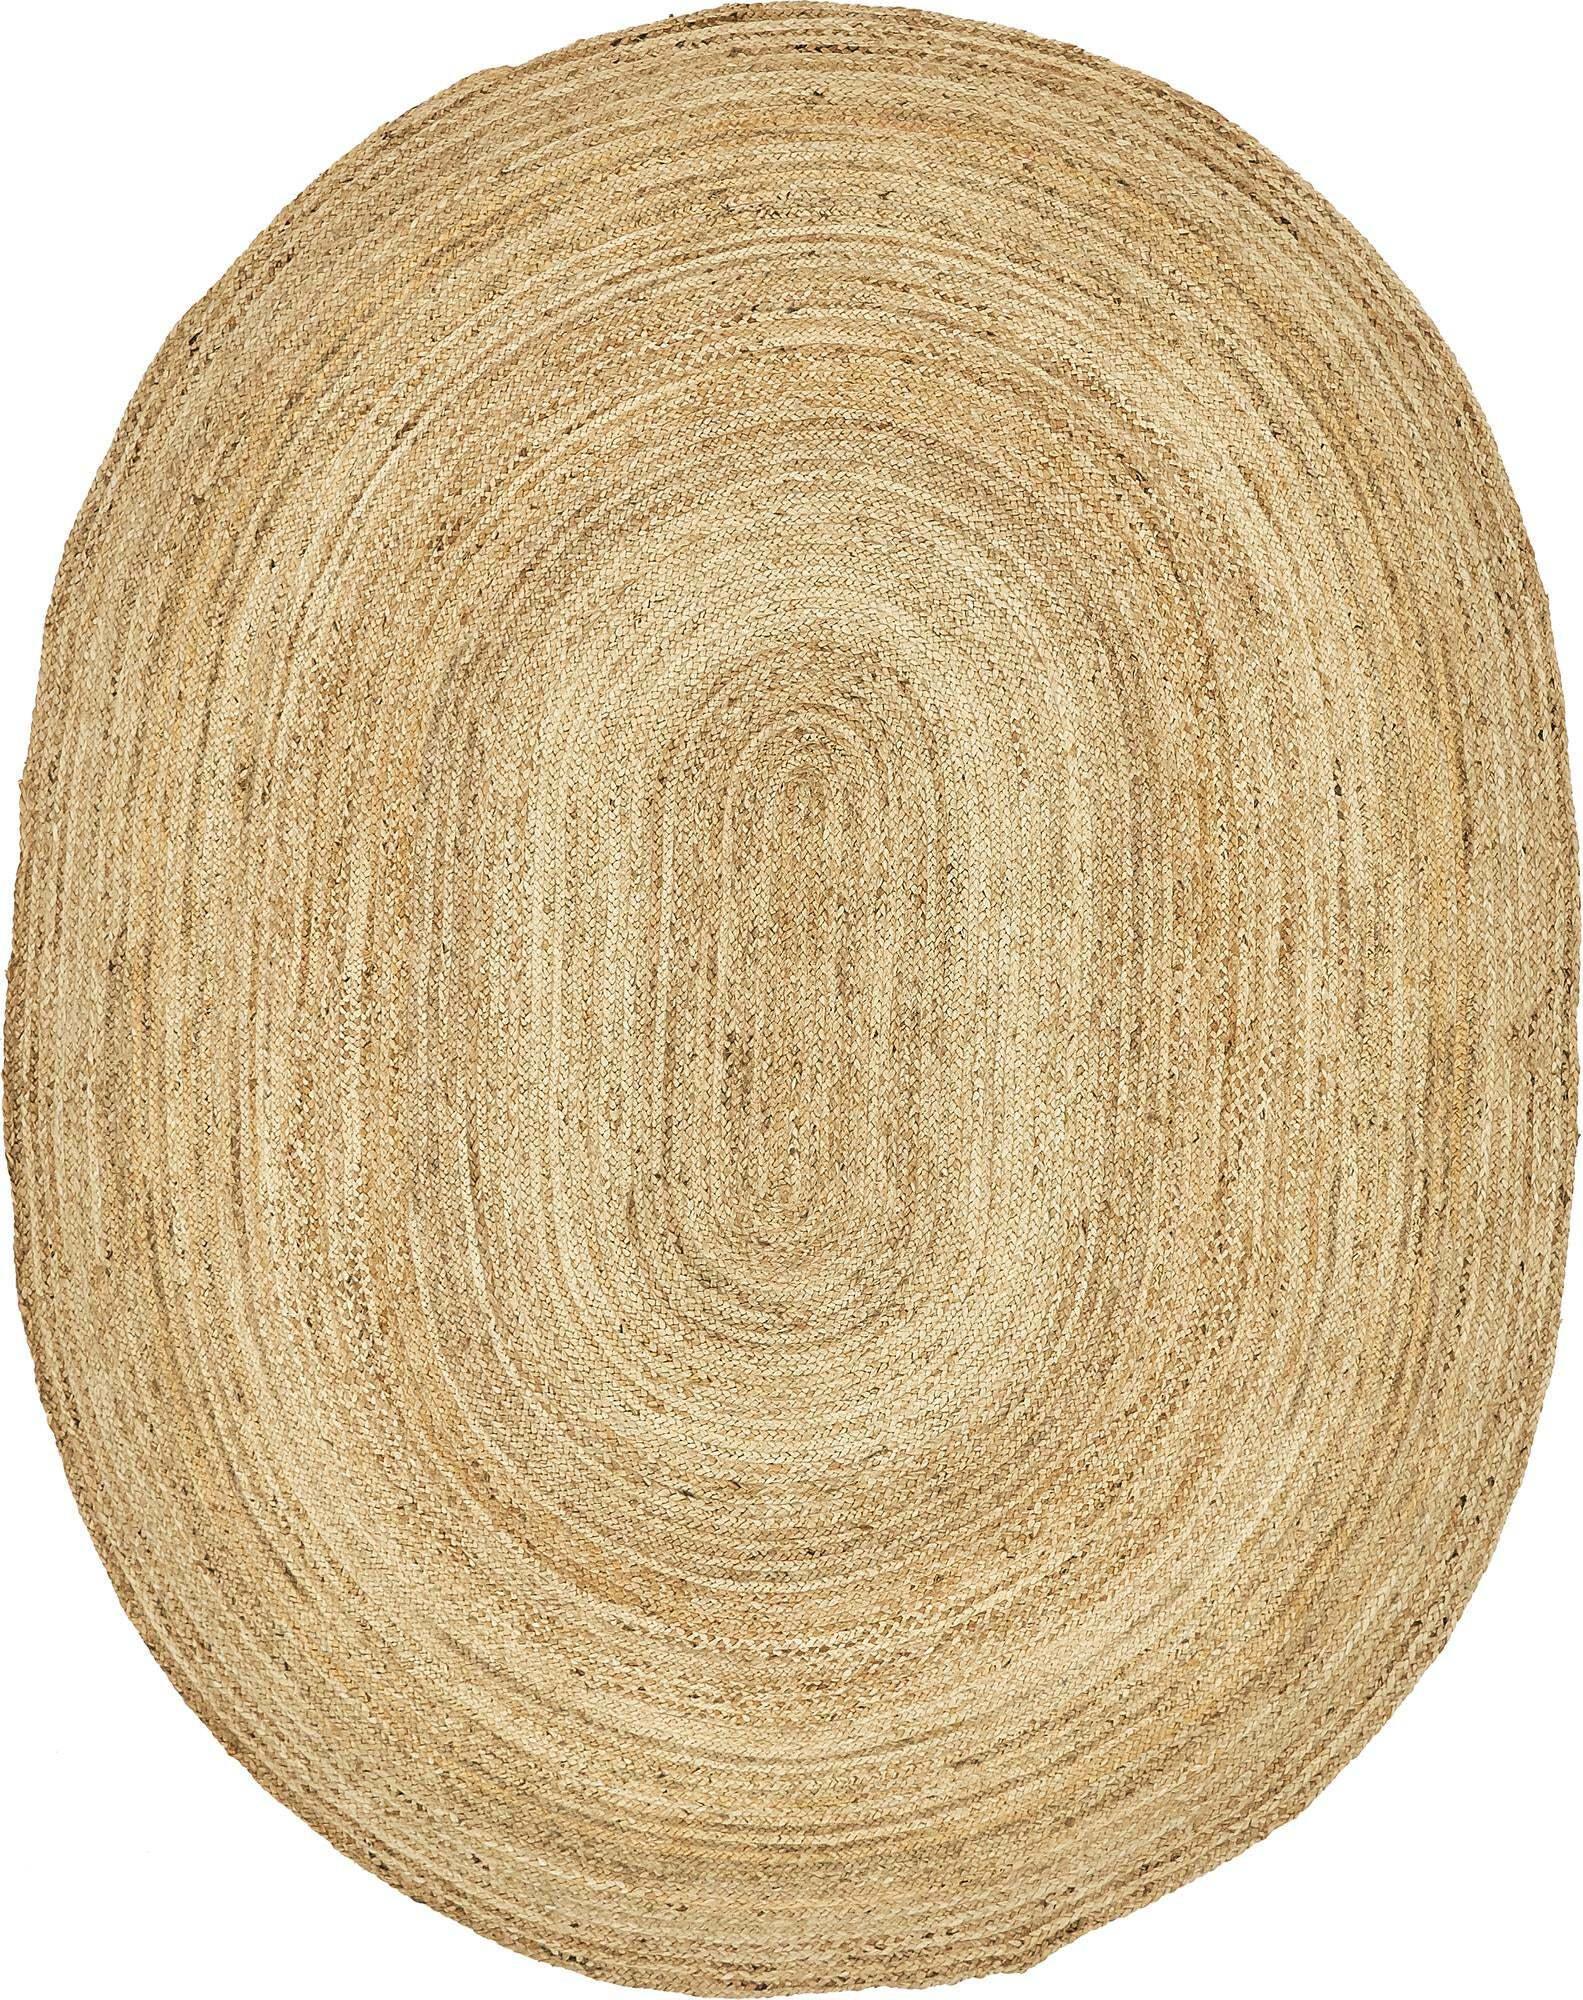 Unique Loom Indoor Rugs - Braided Jute Solid Oval 8x10 Oval Rug Natural